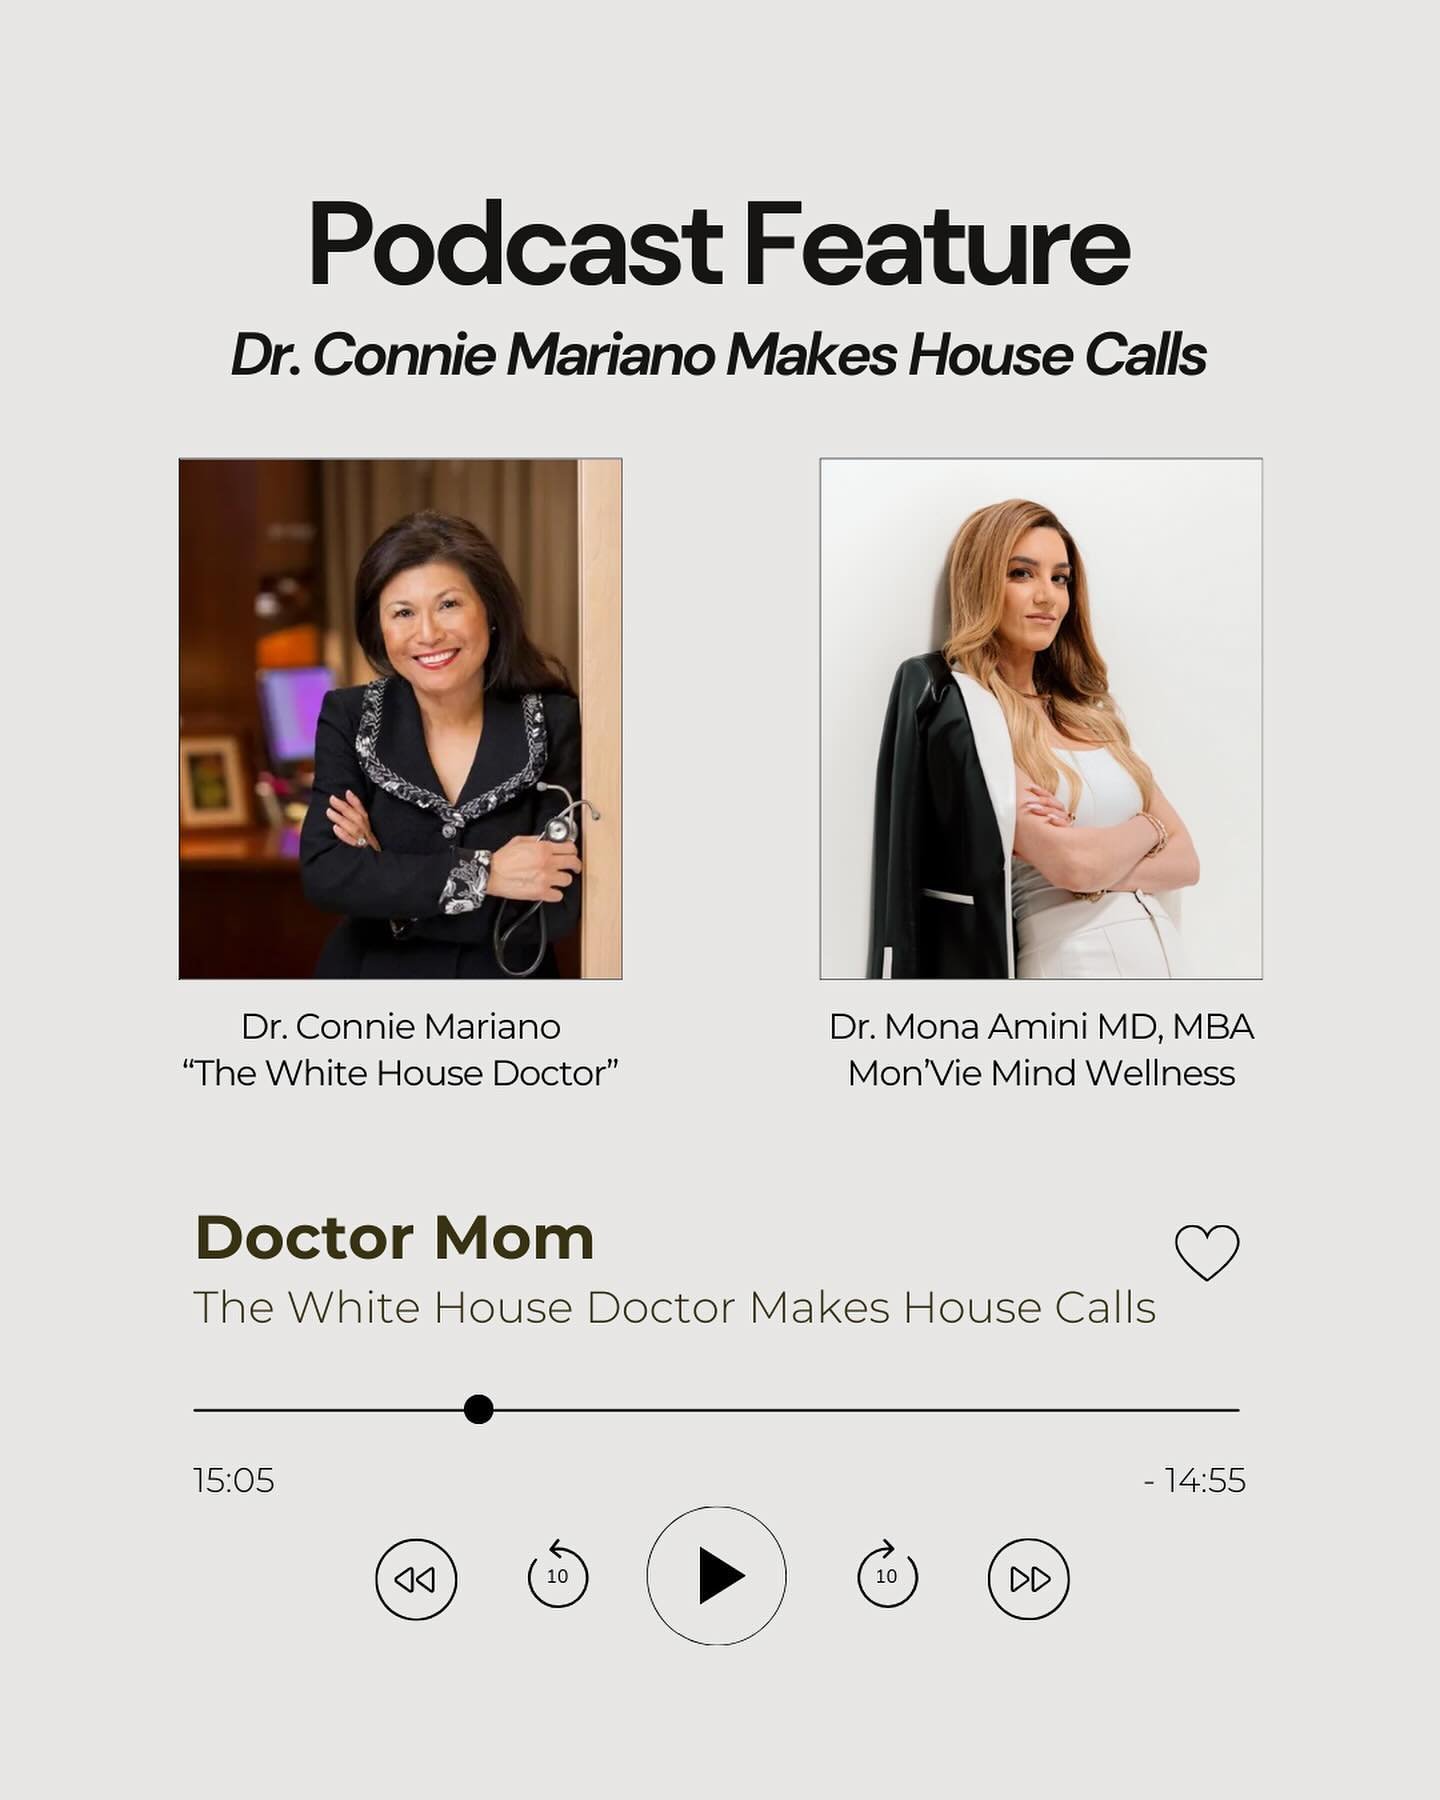 In honor of Mother&rsquo;s Day, I joined Dr. Connie Mariano, &ldquo;The White House Doctor&rdquo;, as we explored the beautiful intersection of family and medicine.

Dr. Mariano is a retired Navy Rear Admiral and board-certified specialist in interna